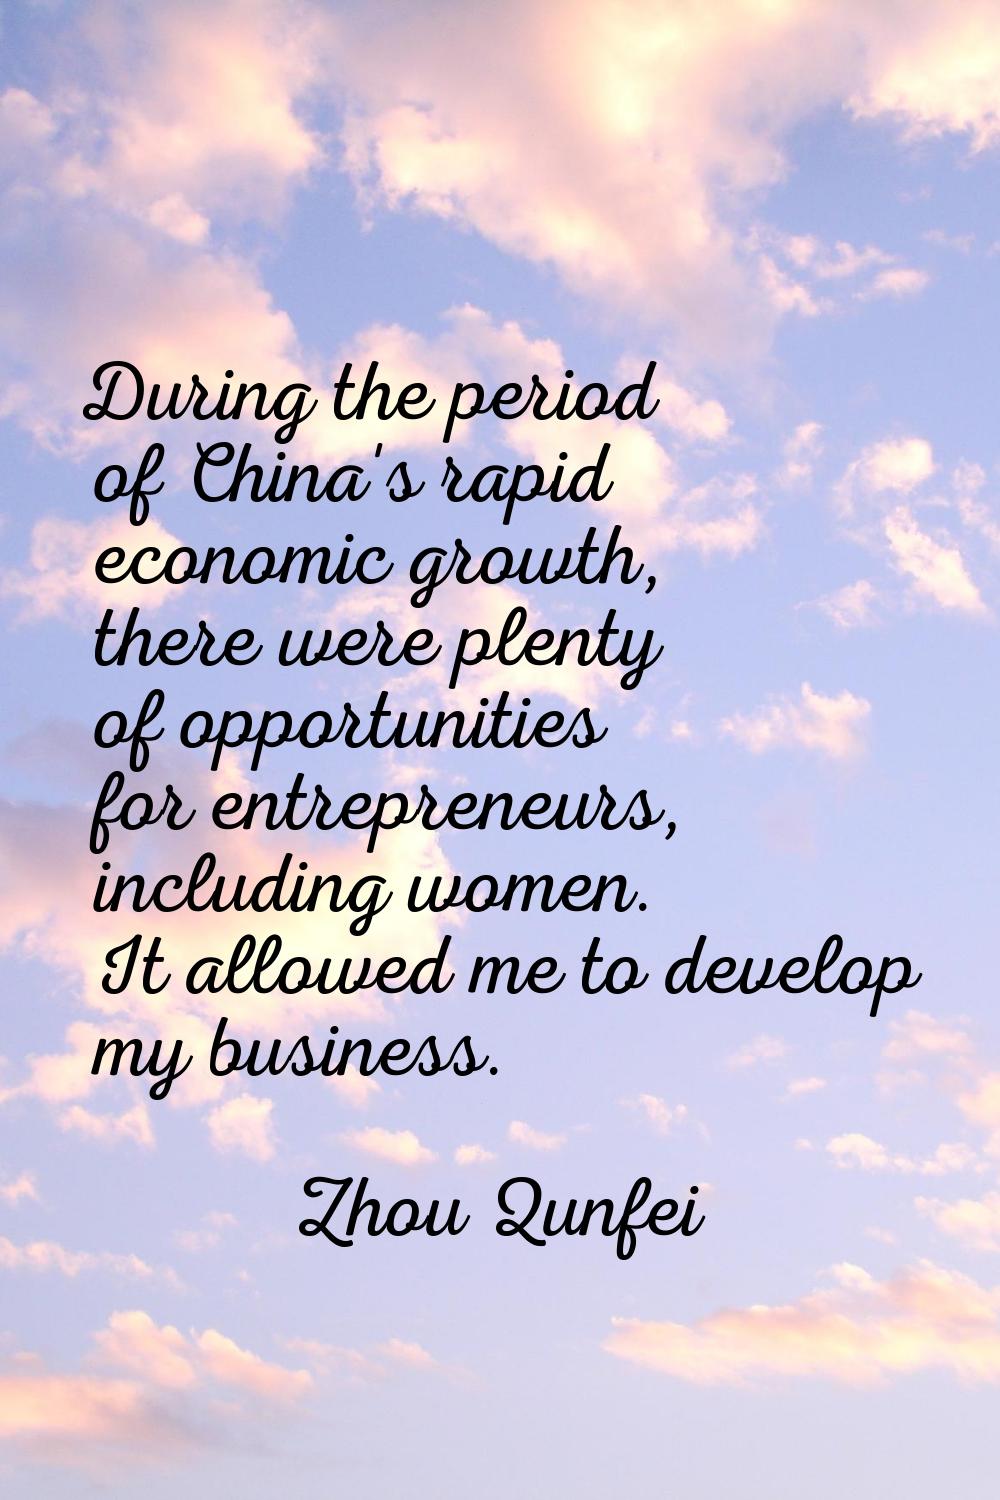 During the period of China's rapid economic growth, there were plenty of opportunities for entrepre